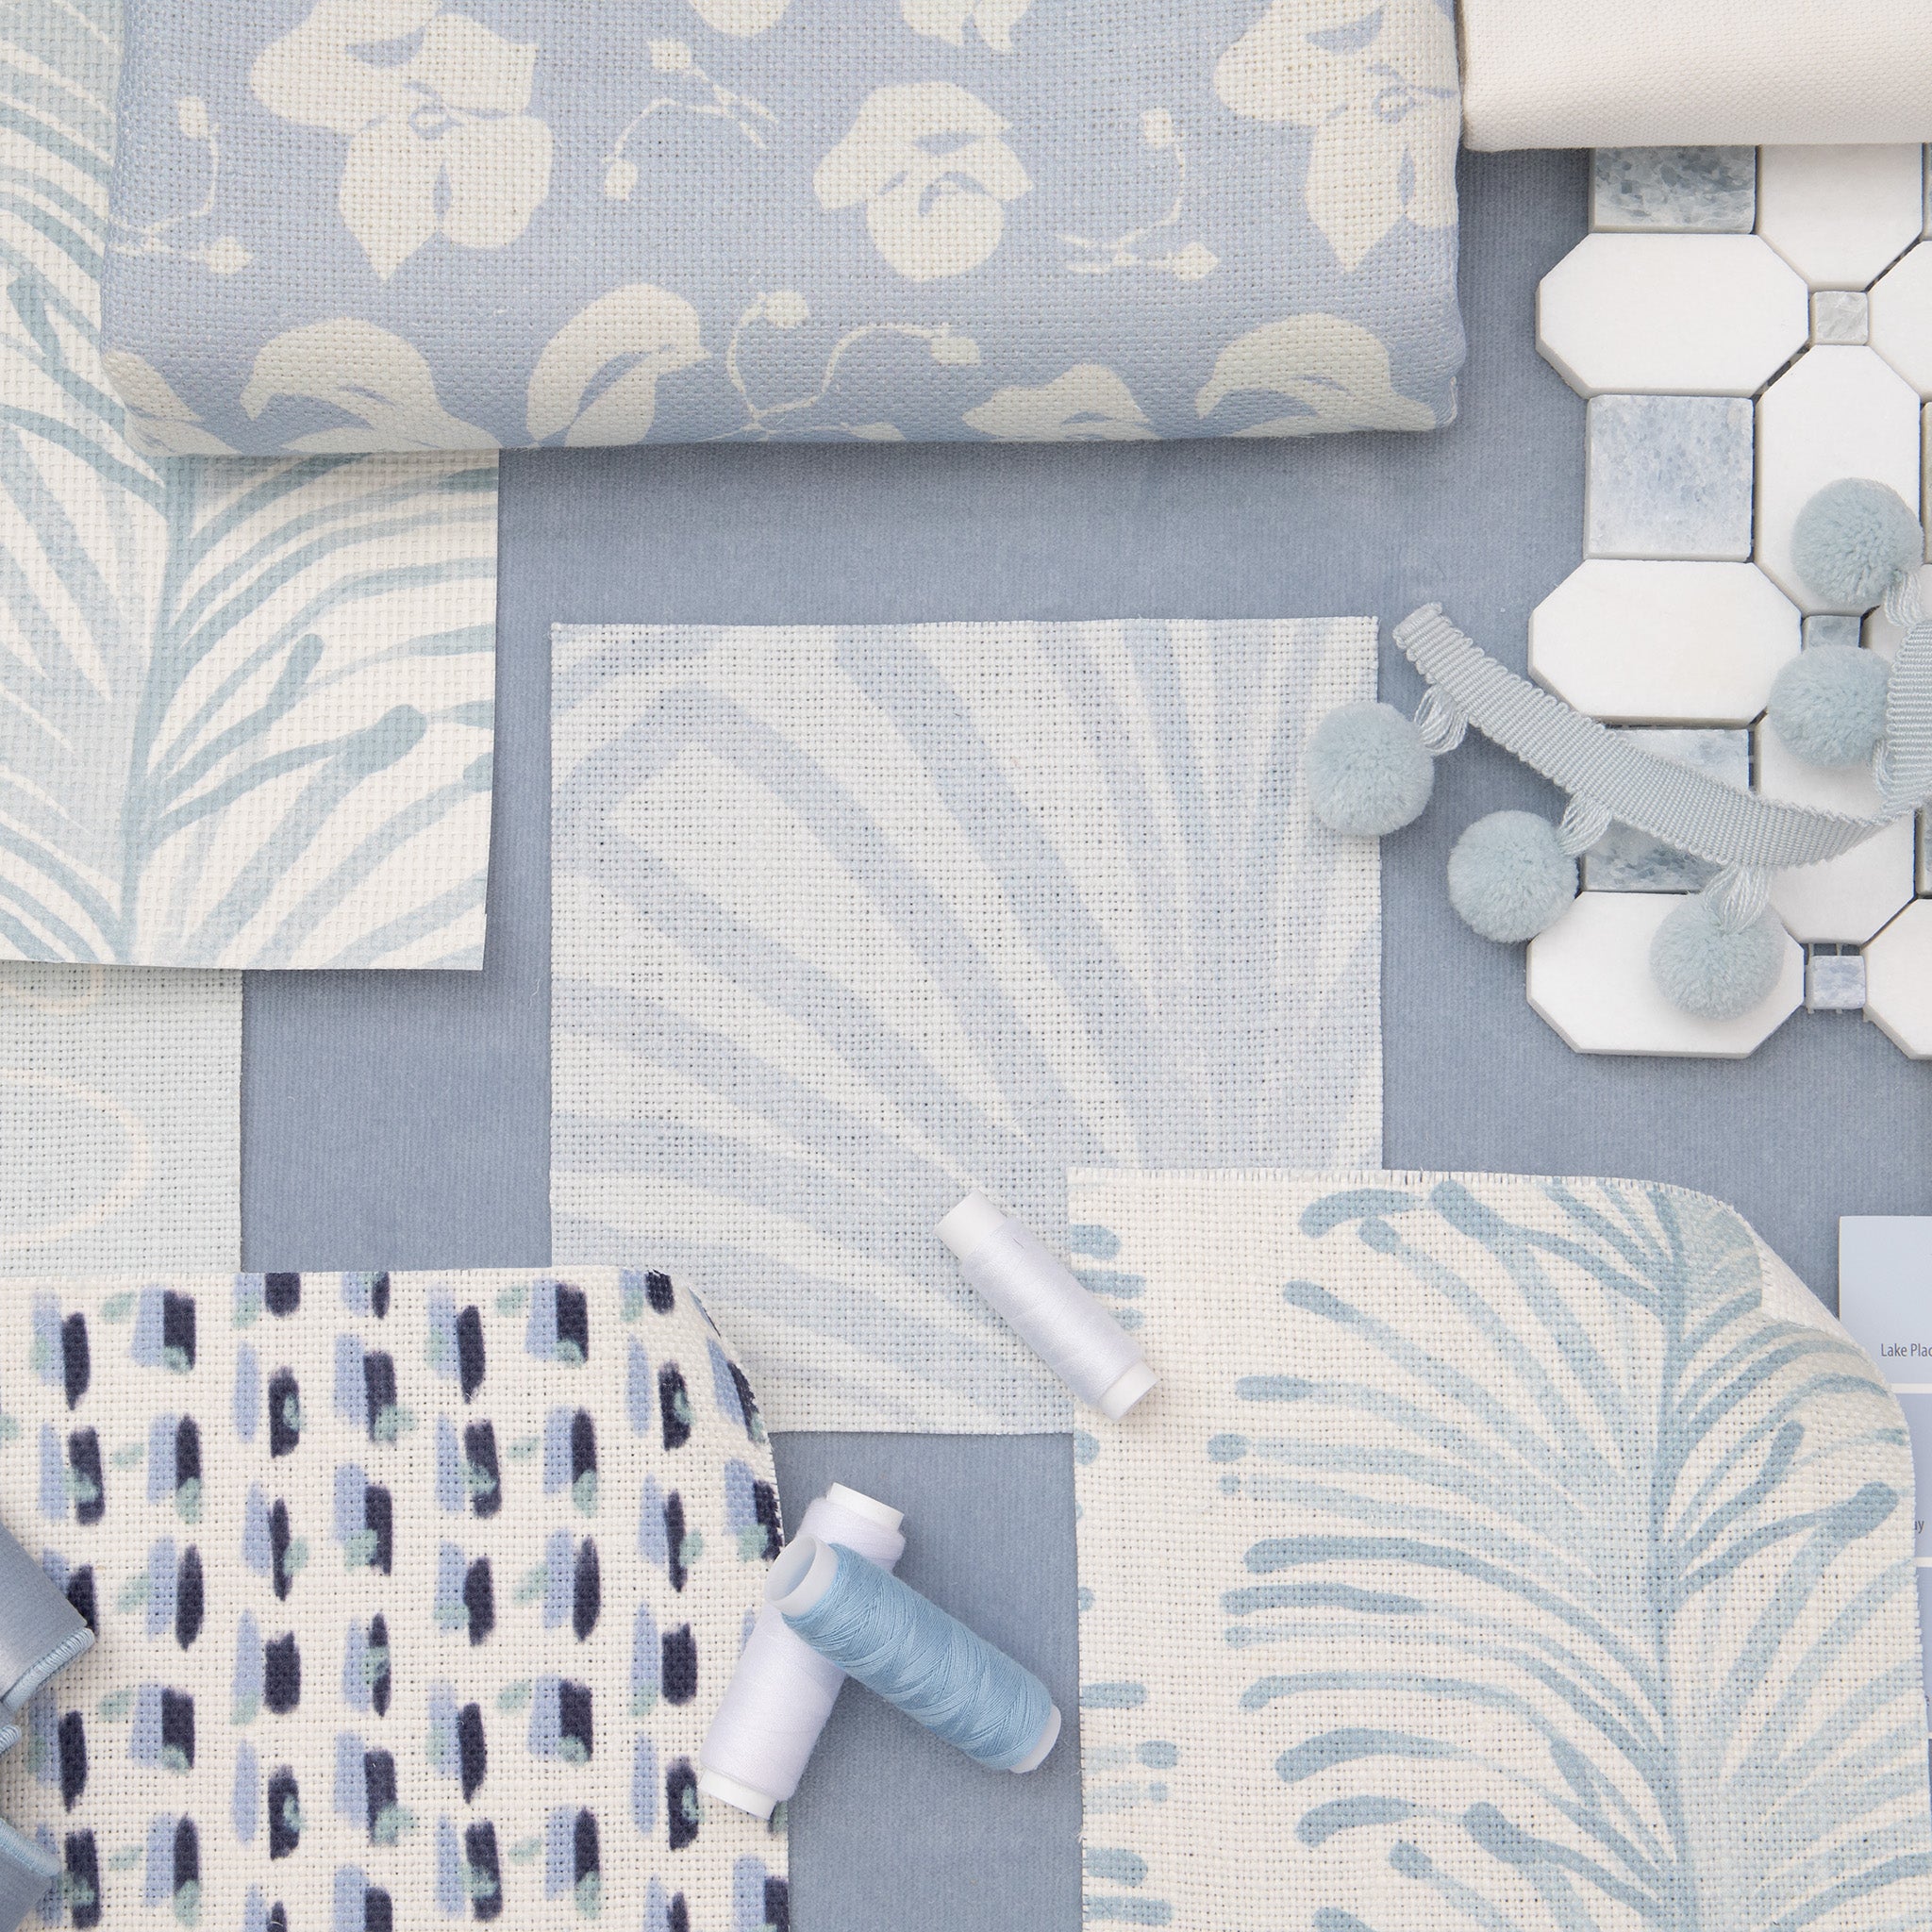 Interior design moodboard and fabric inspirations with Sky Blue Botanical Stripe Printed Swatch, Sky and Navy Blue Poppy Printed Swatch, and Sky Blue Palm Printed Swatch